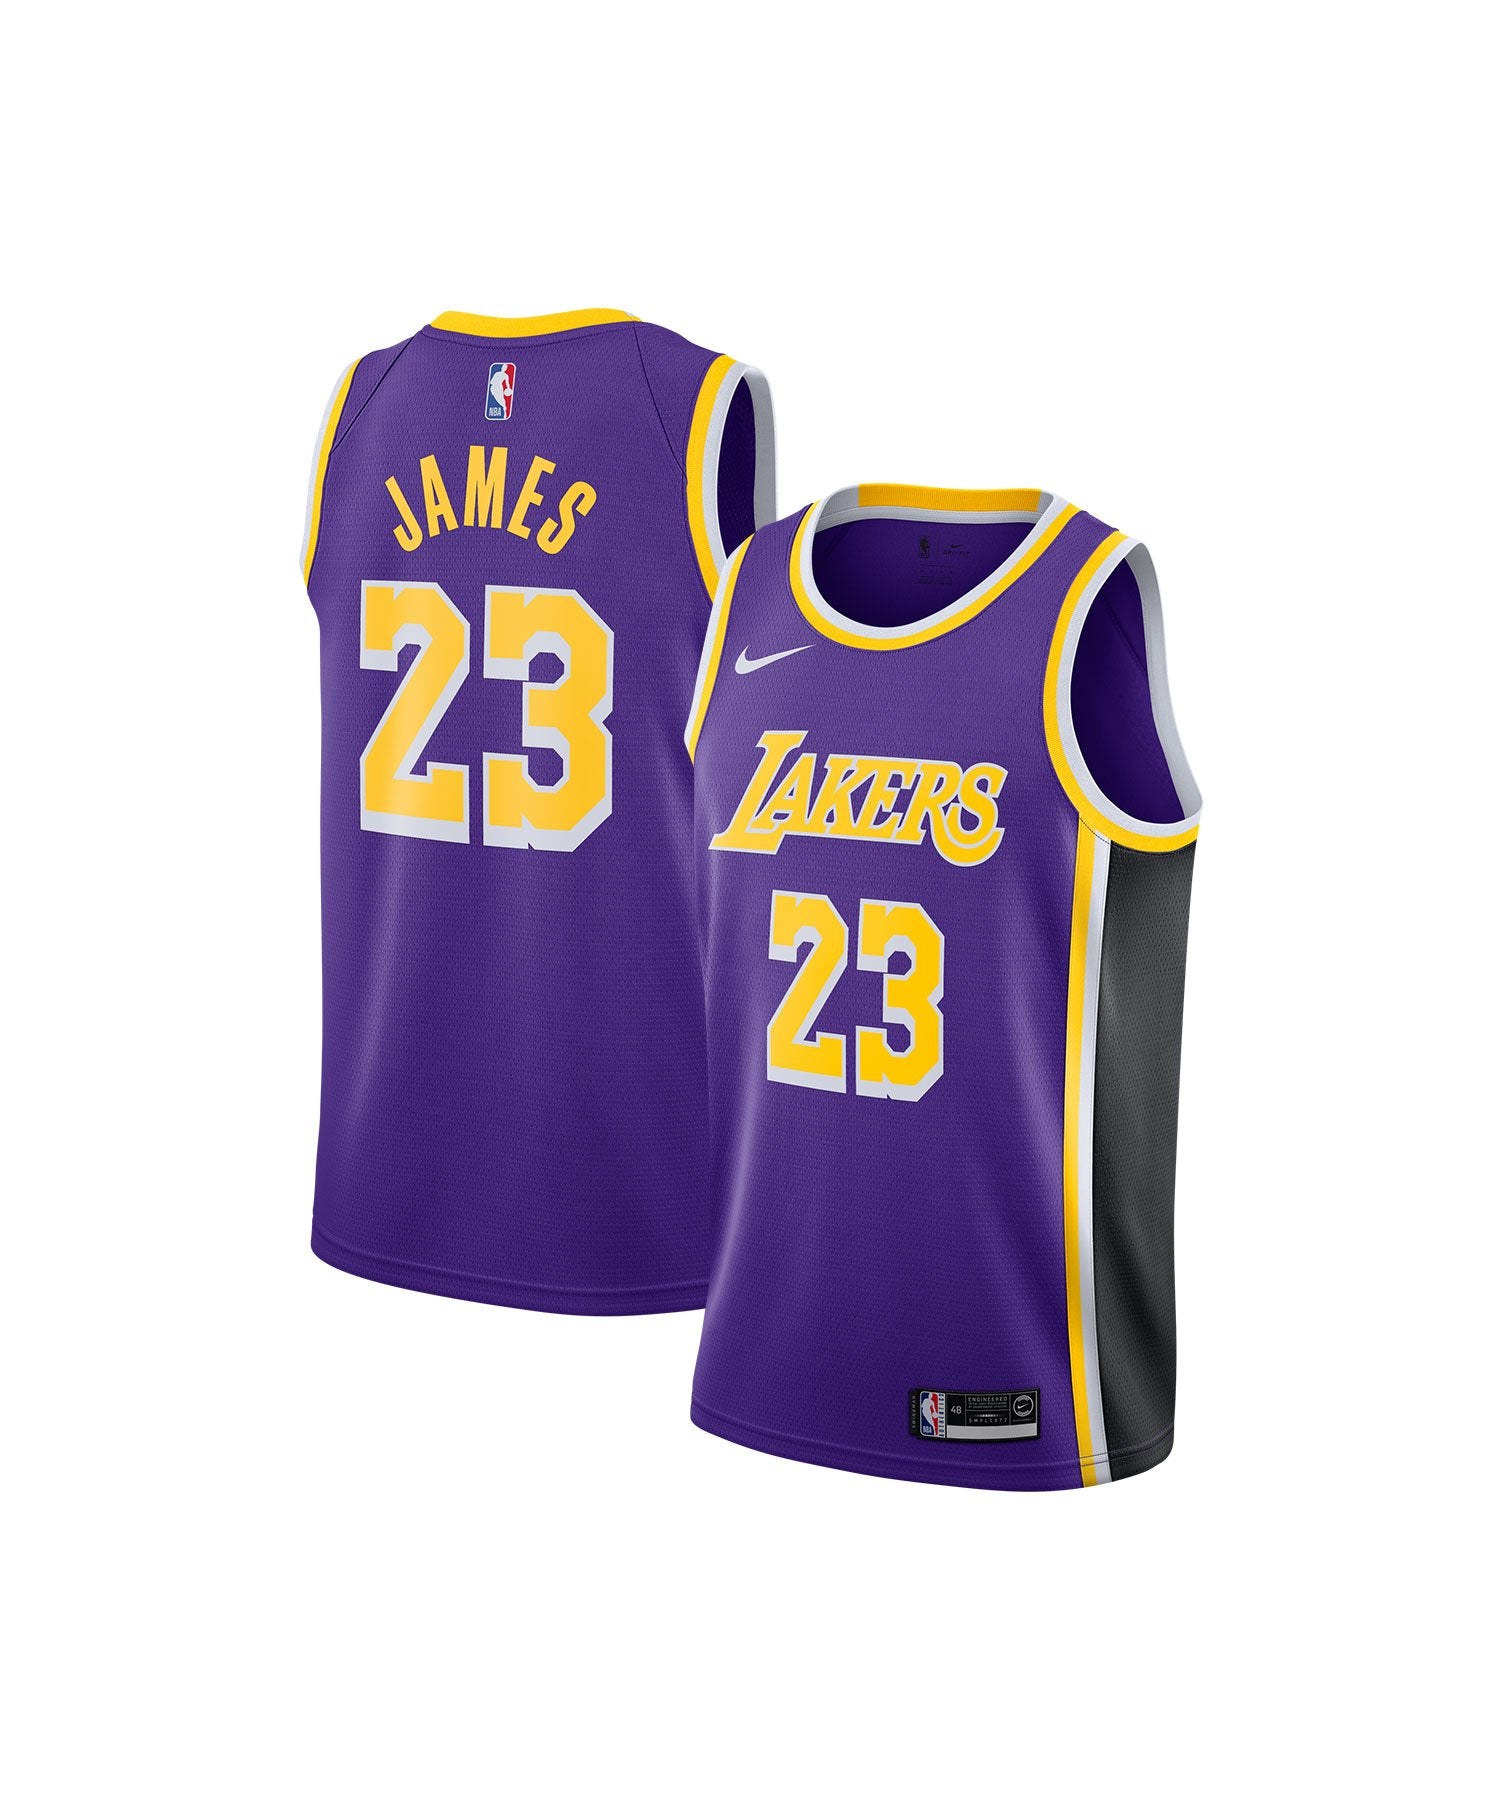 LeBron James Special Classic Edition Jersey  Lebron james lakers, Lebron  james, Lebron james heat jersey